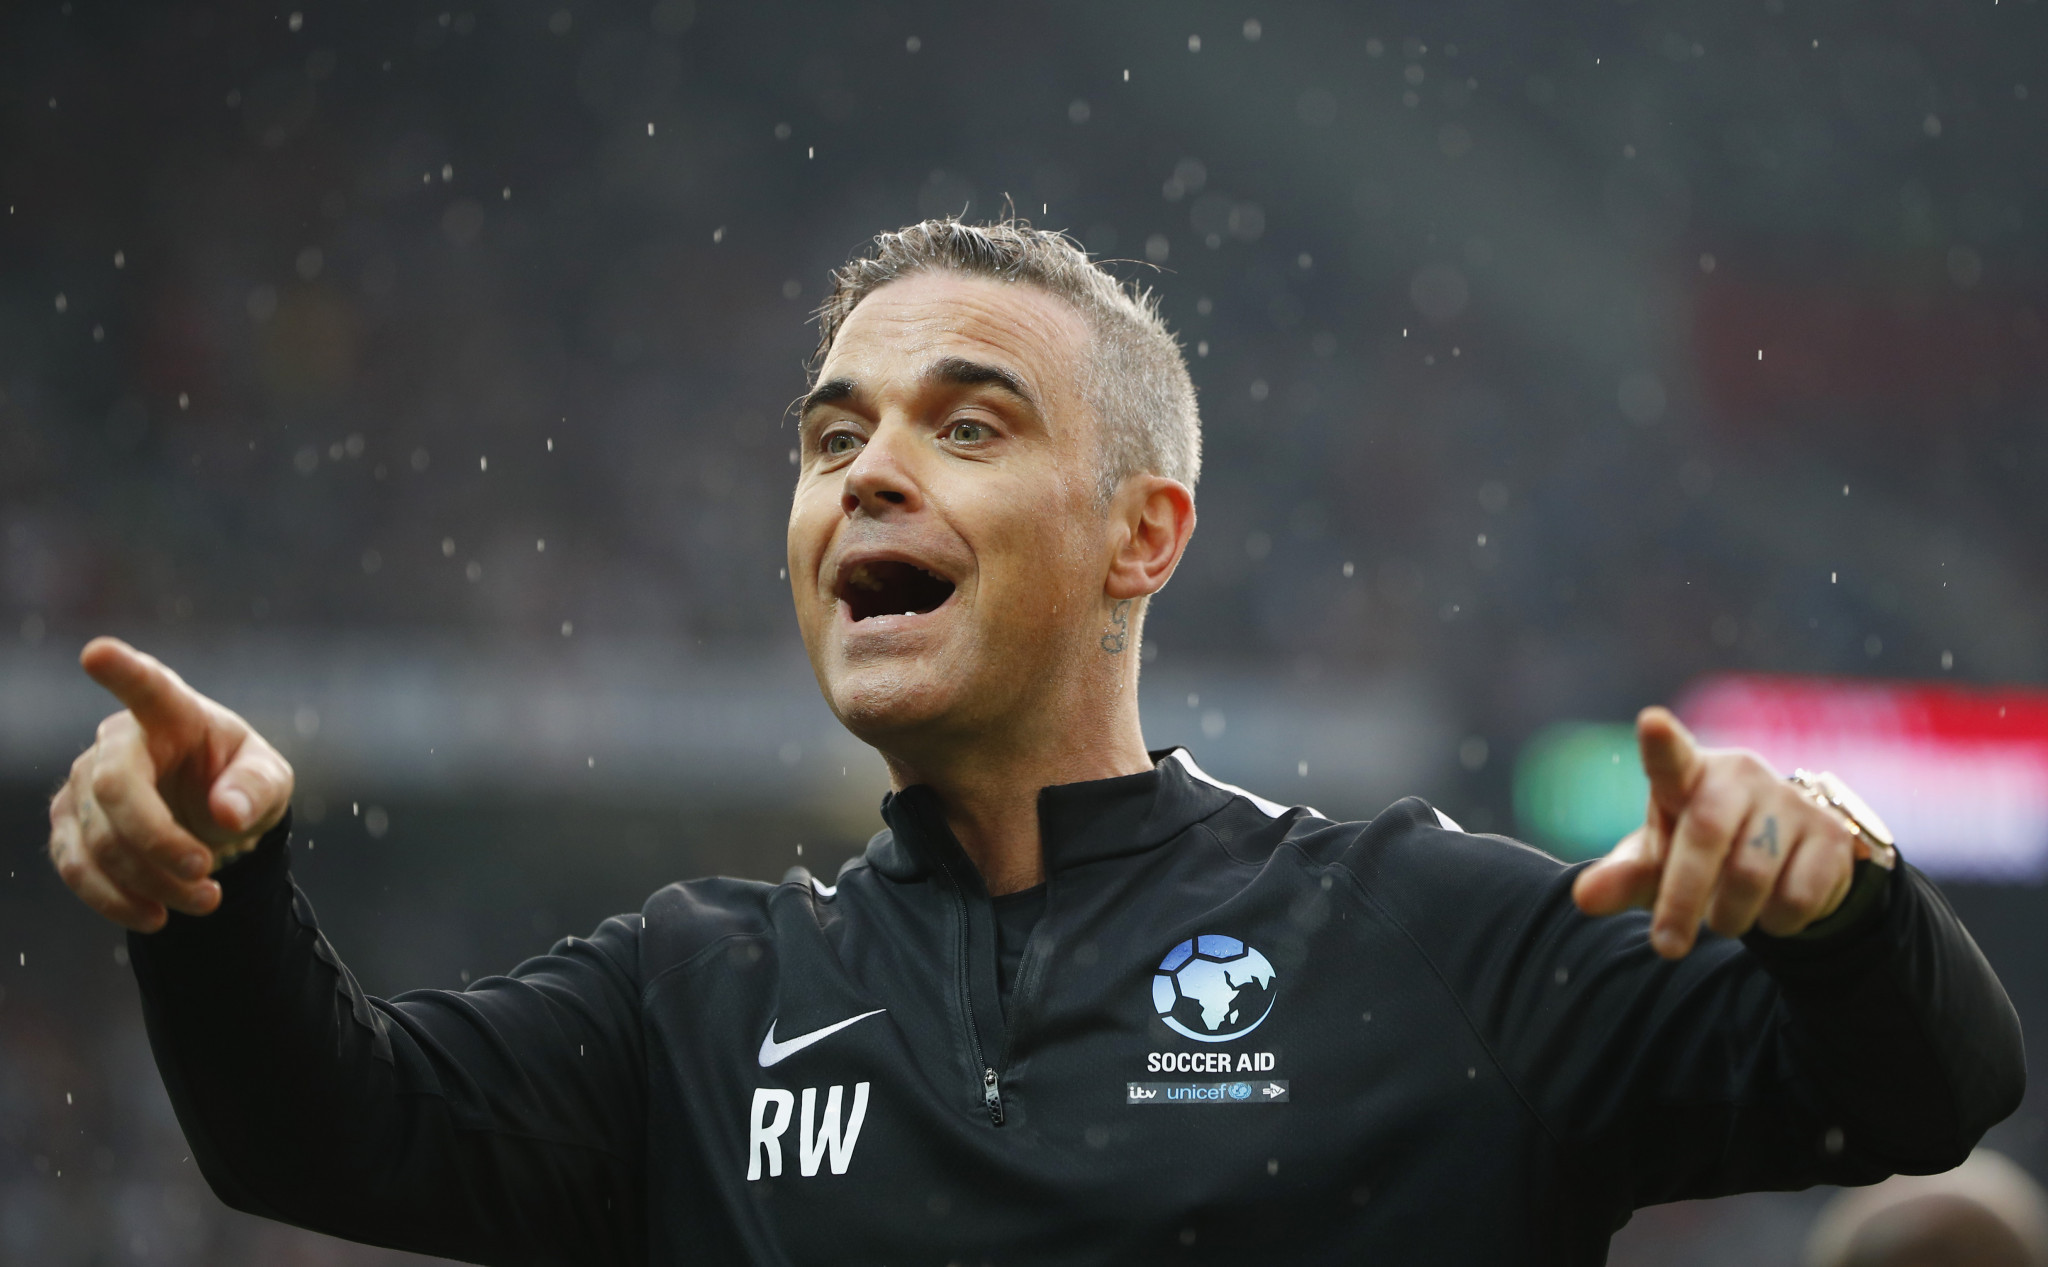 Robbie Williams, pictured playing in a Soccer Aid football match, is due to appear at the Opening Ceremony ©Getty Images